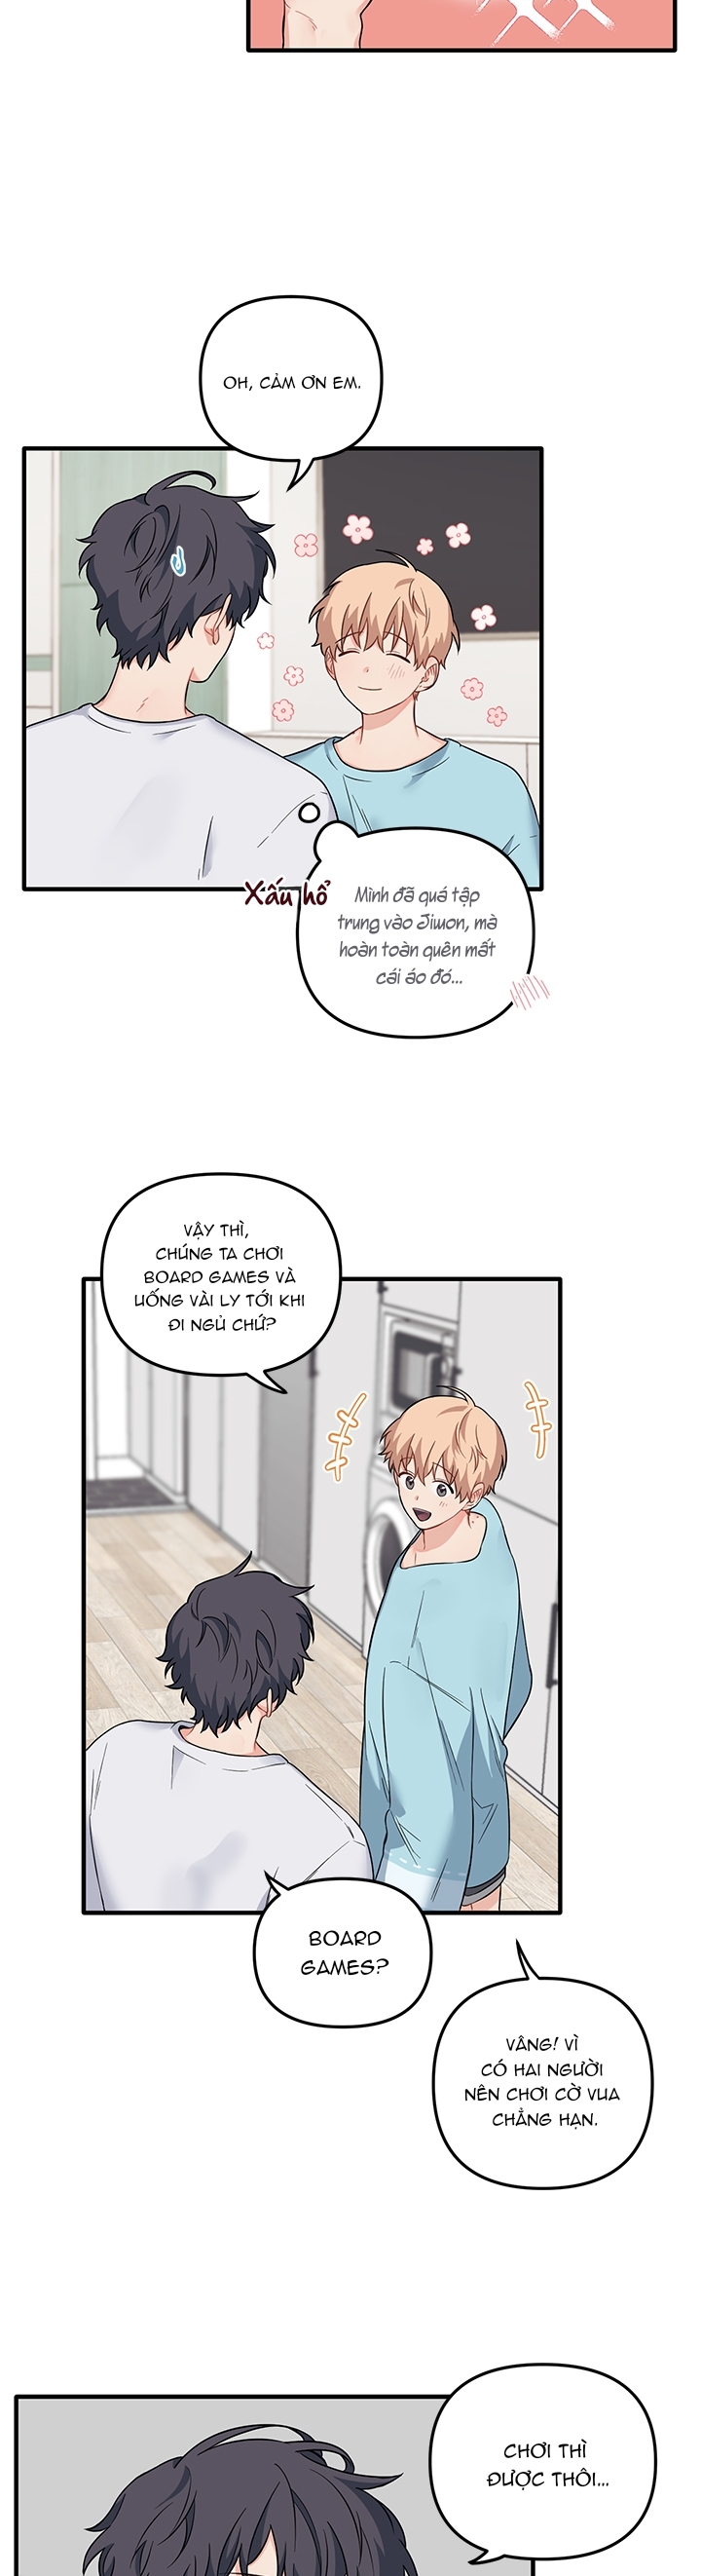 blood-and-love-chap-27-28